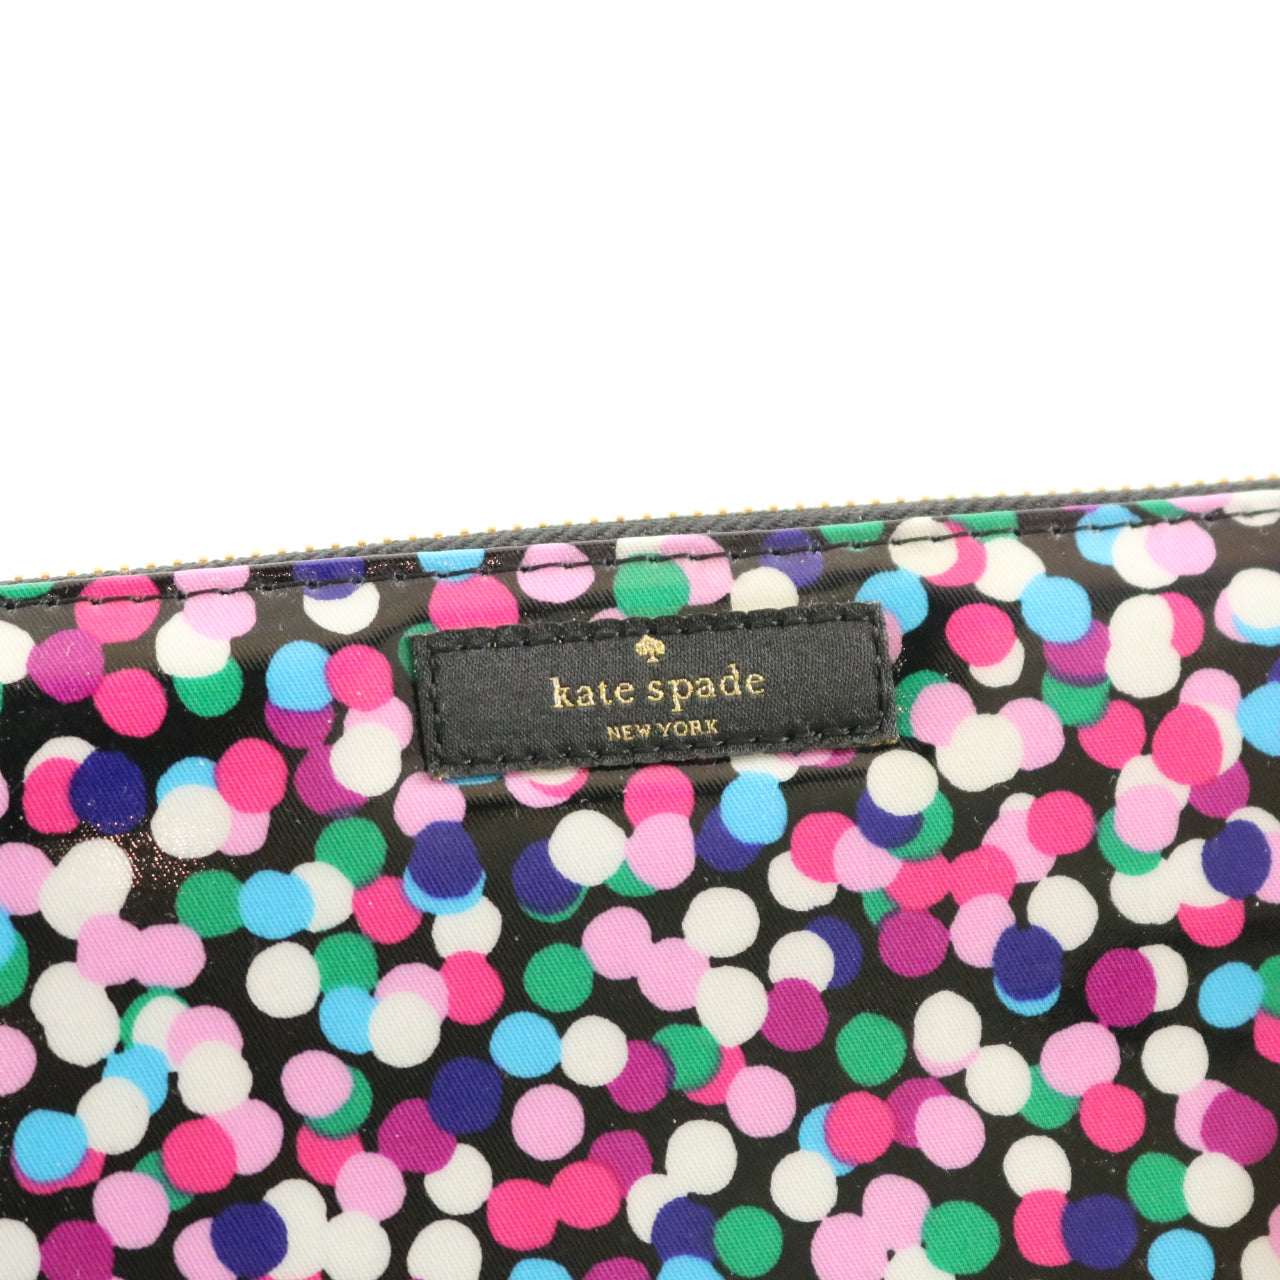 Colourful Dot Wallet